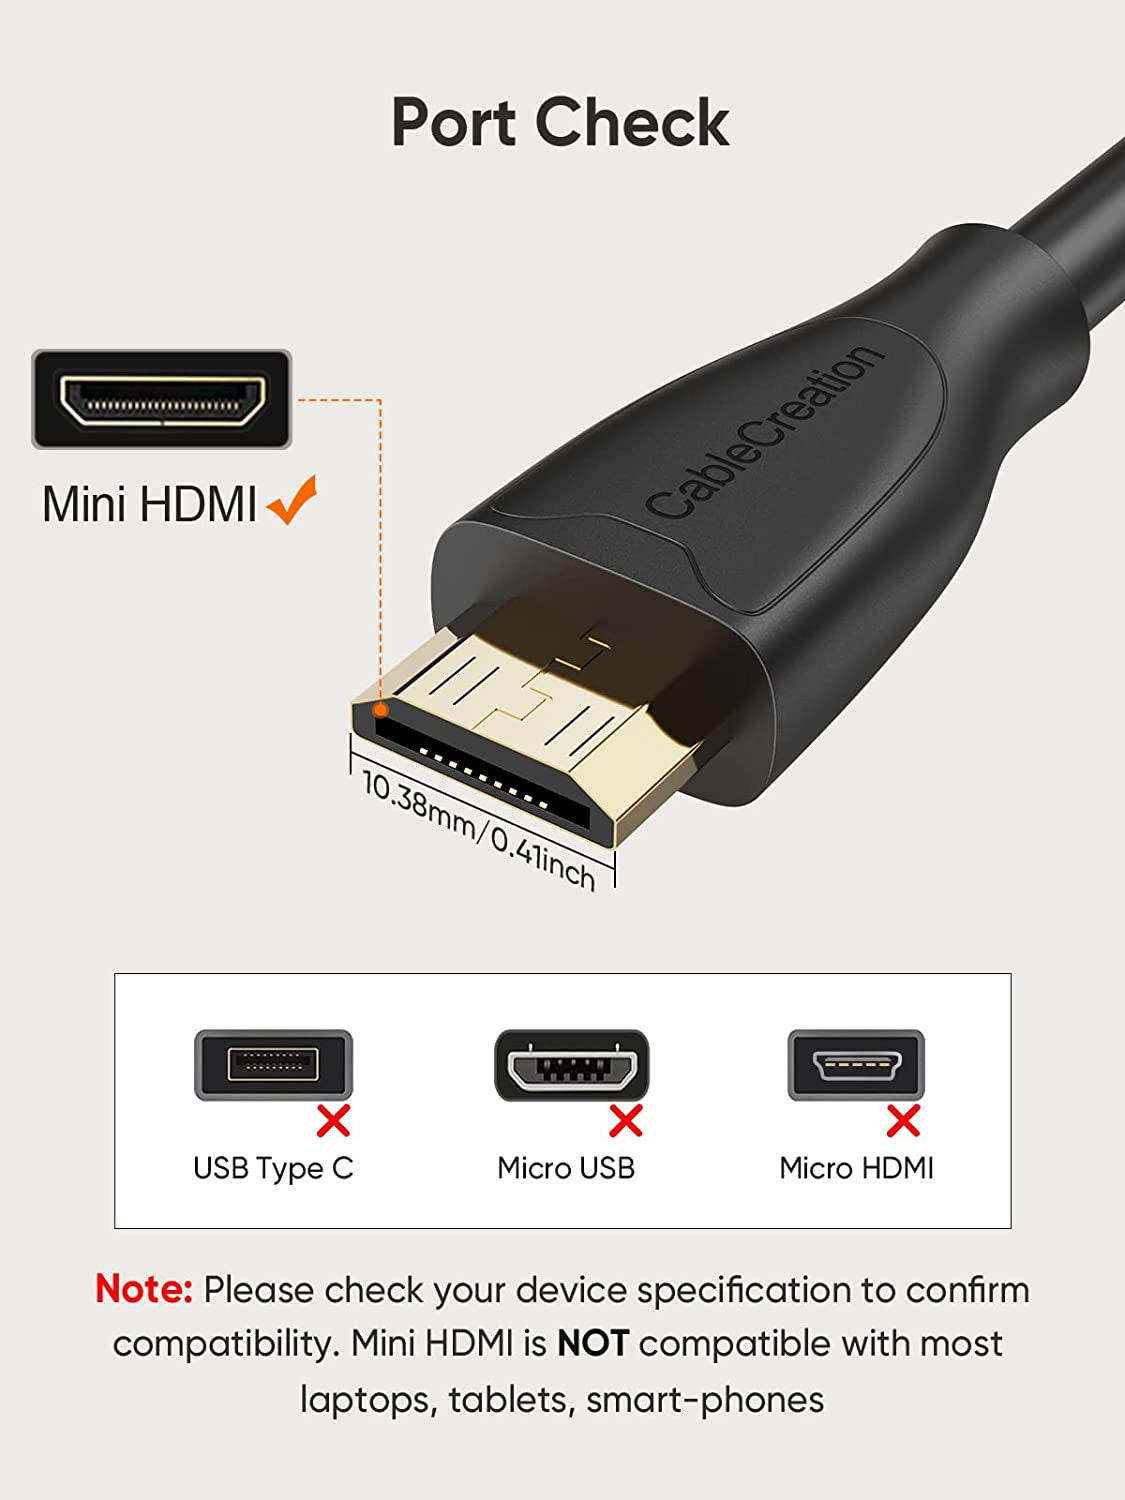 Mini HDMI to HDMI Cable 6FT, 4K High-Speed HDMI to Mini HDMI Adapter, Mini HDMI to Standard HDMI for Graphics Card, HDTV, Camera, HDR-XR50, Z6, EOS RP/EOS R/EOS 7D Mark II/XA40, Etc